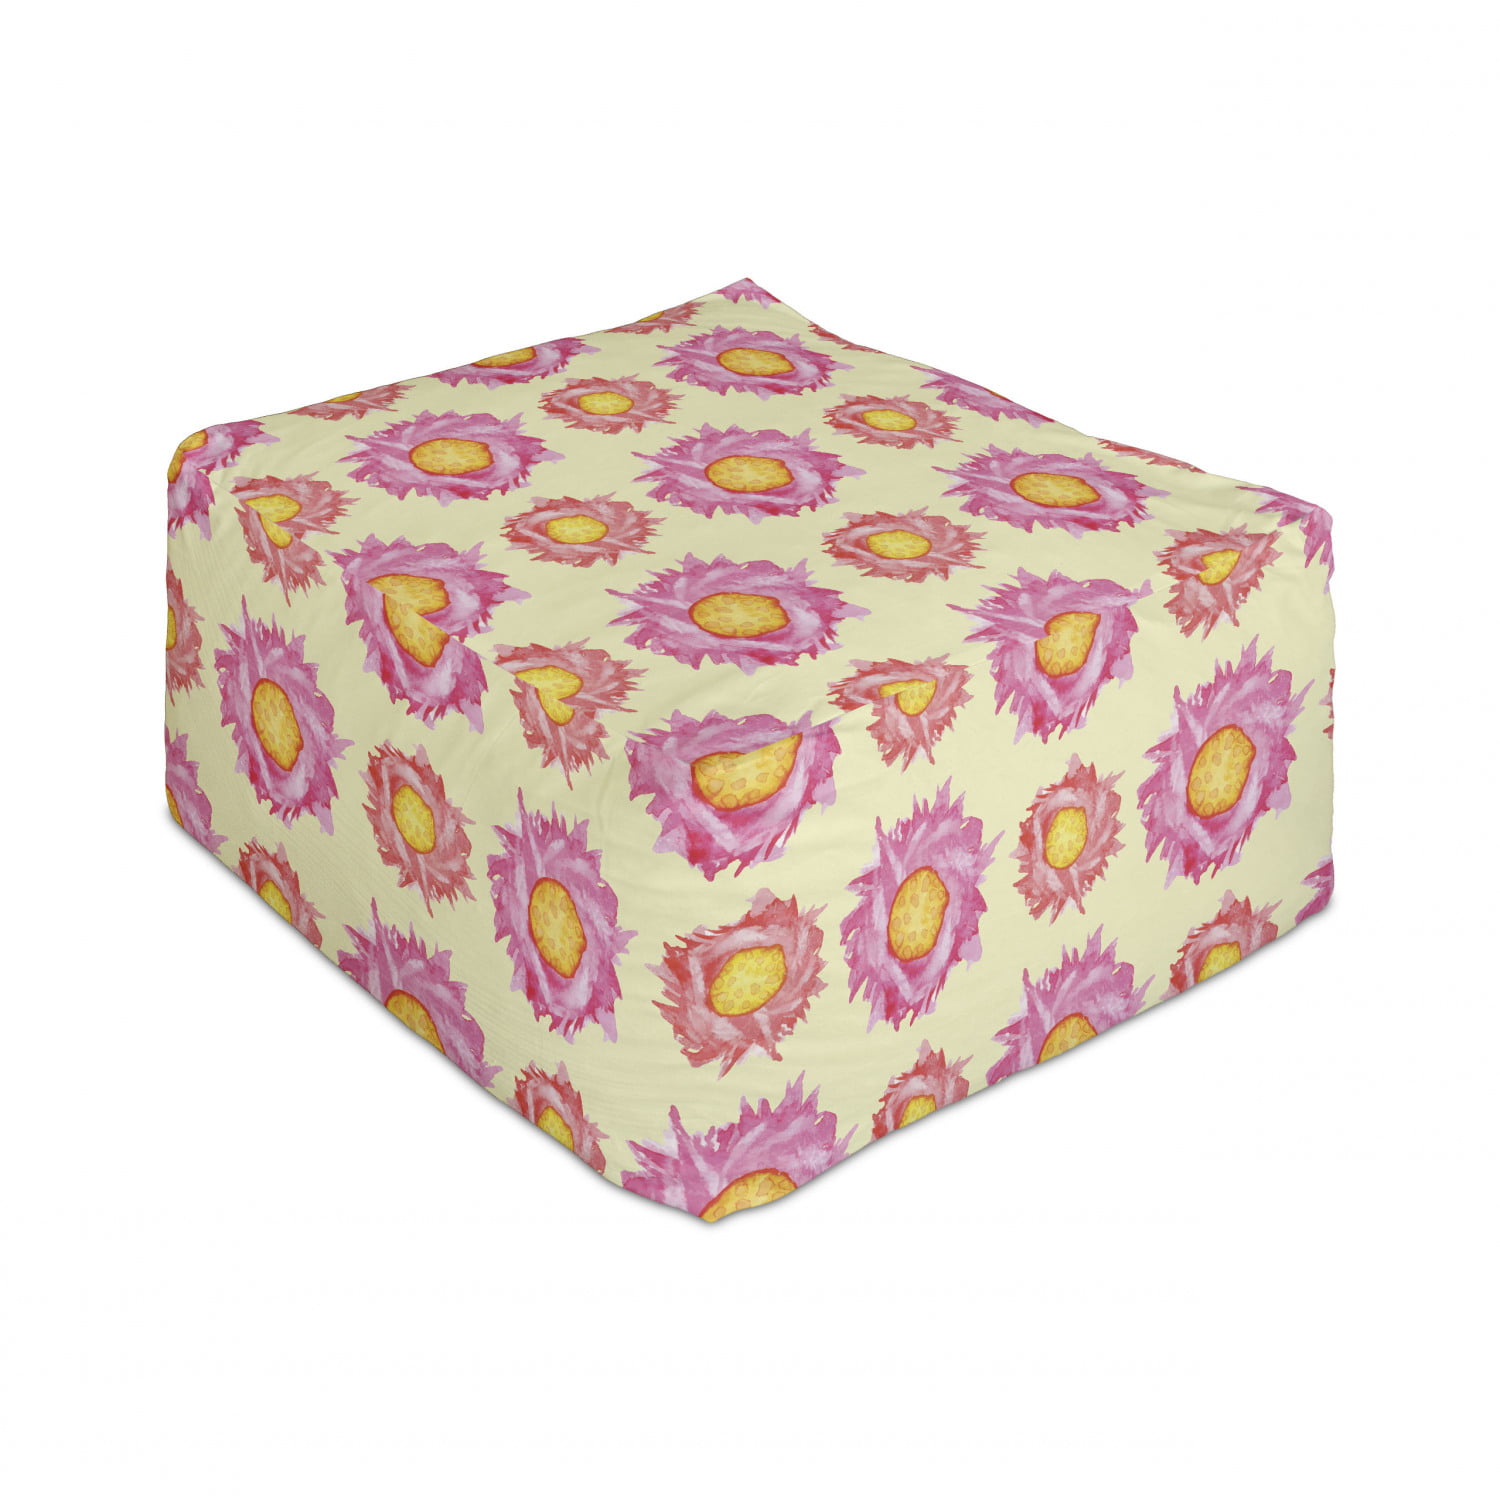 25 Dried Rose Pale Rose Ambesonne Rose Flowers Rectangle Pouf Pastel Tone Romantic Flowers Petals Motif Blossoming Nature Print Under Desk Foot Stool for Living Room Office Ottoman with Cover 